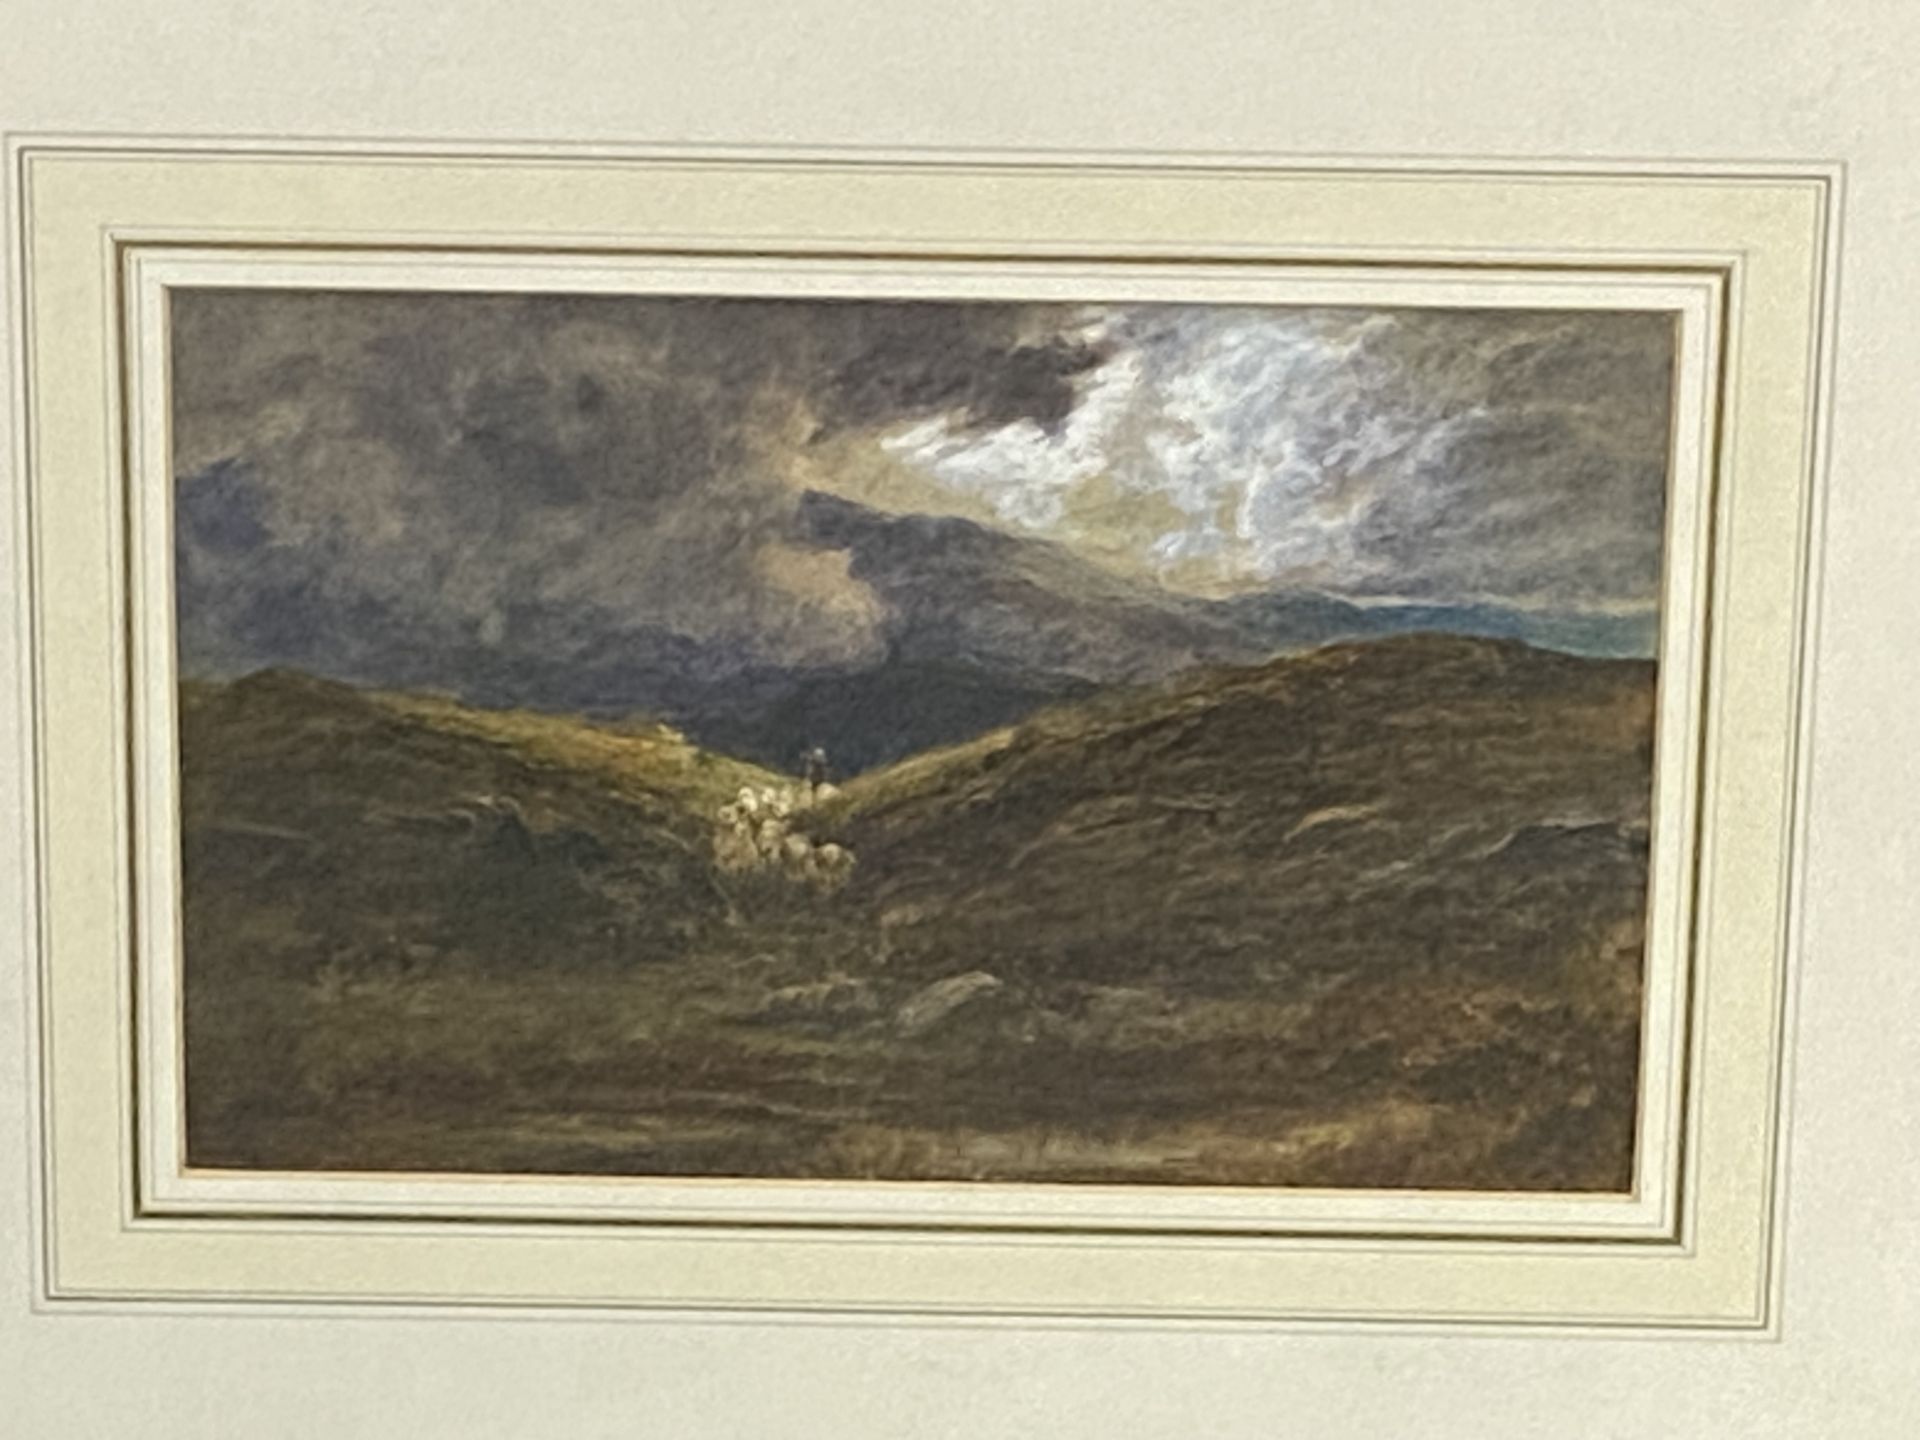 Framed and glazed watercolour of sheep on a moor - Image 3 of 3